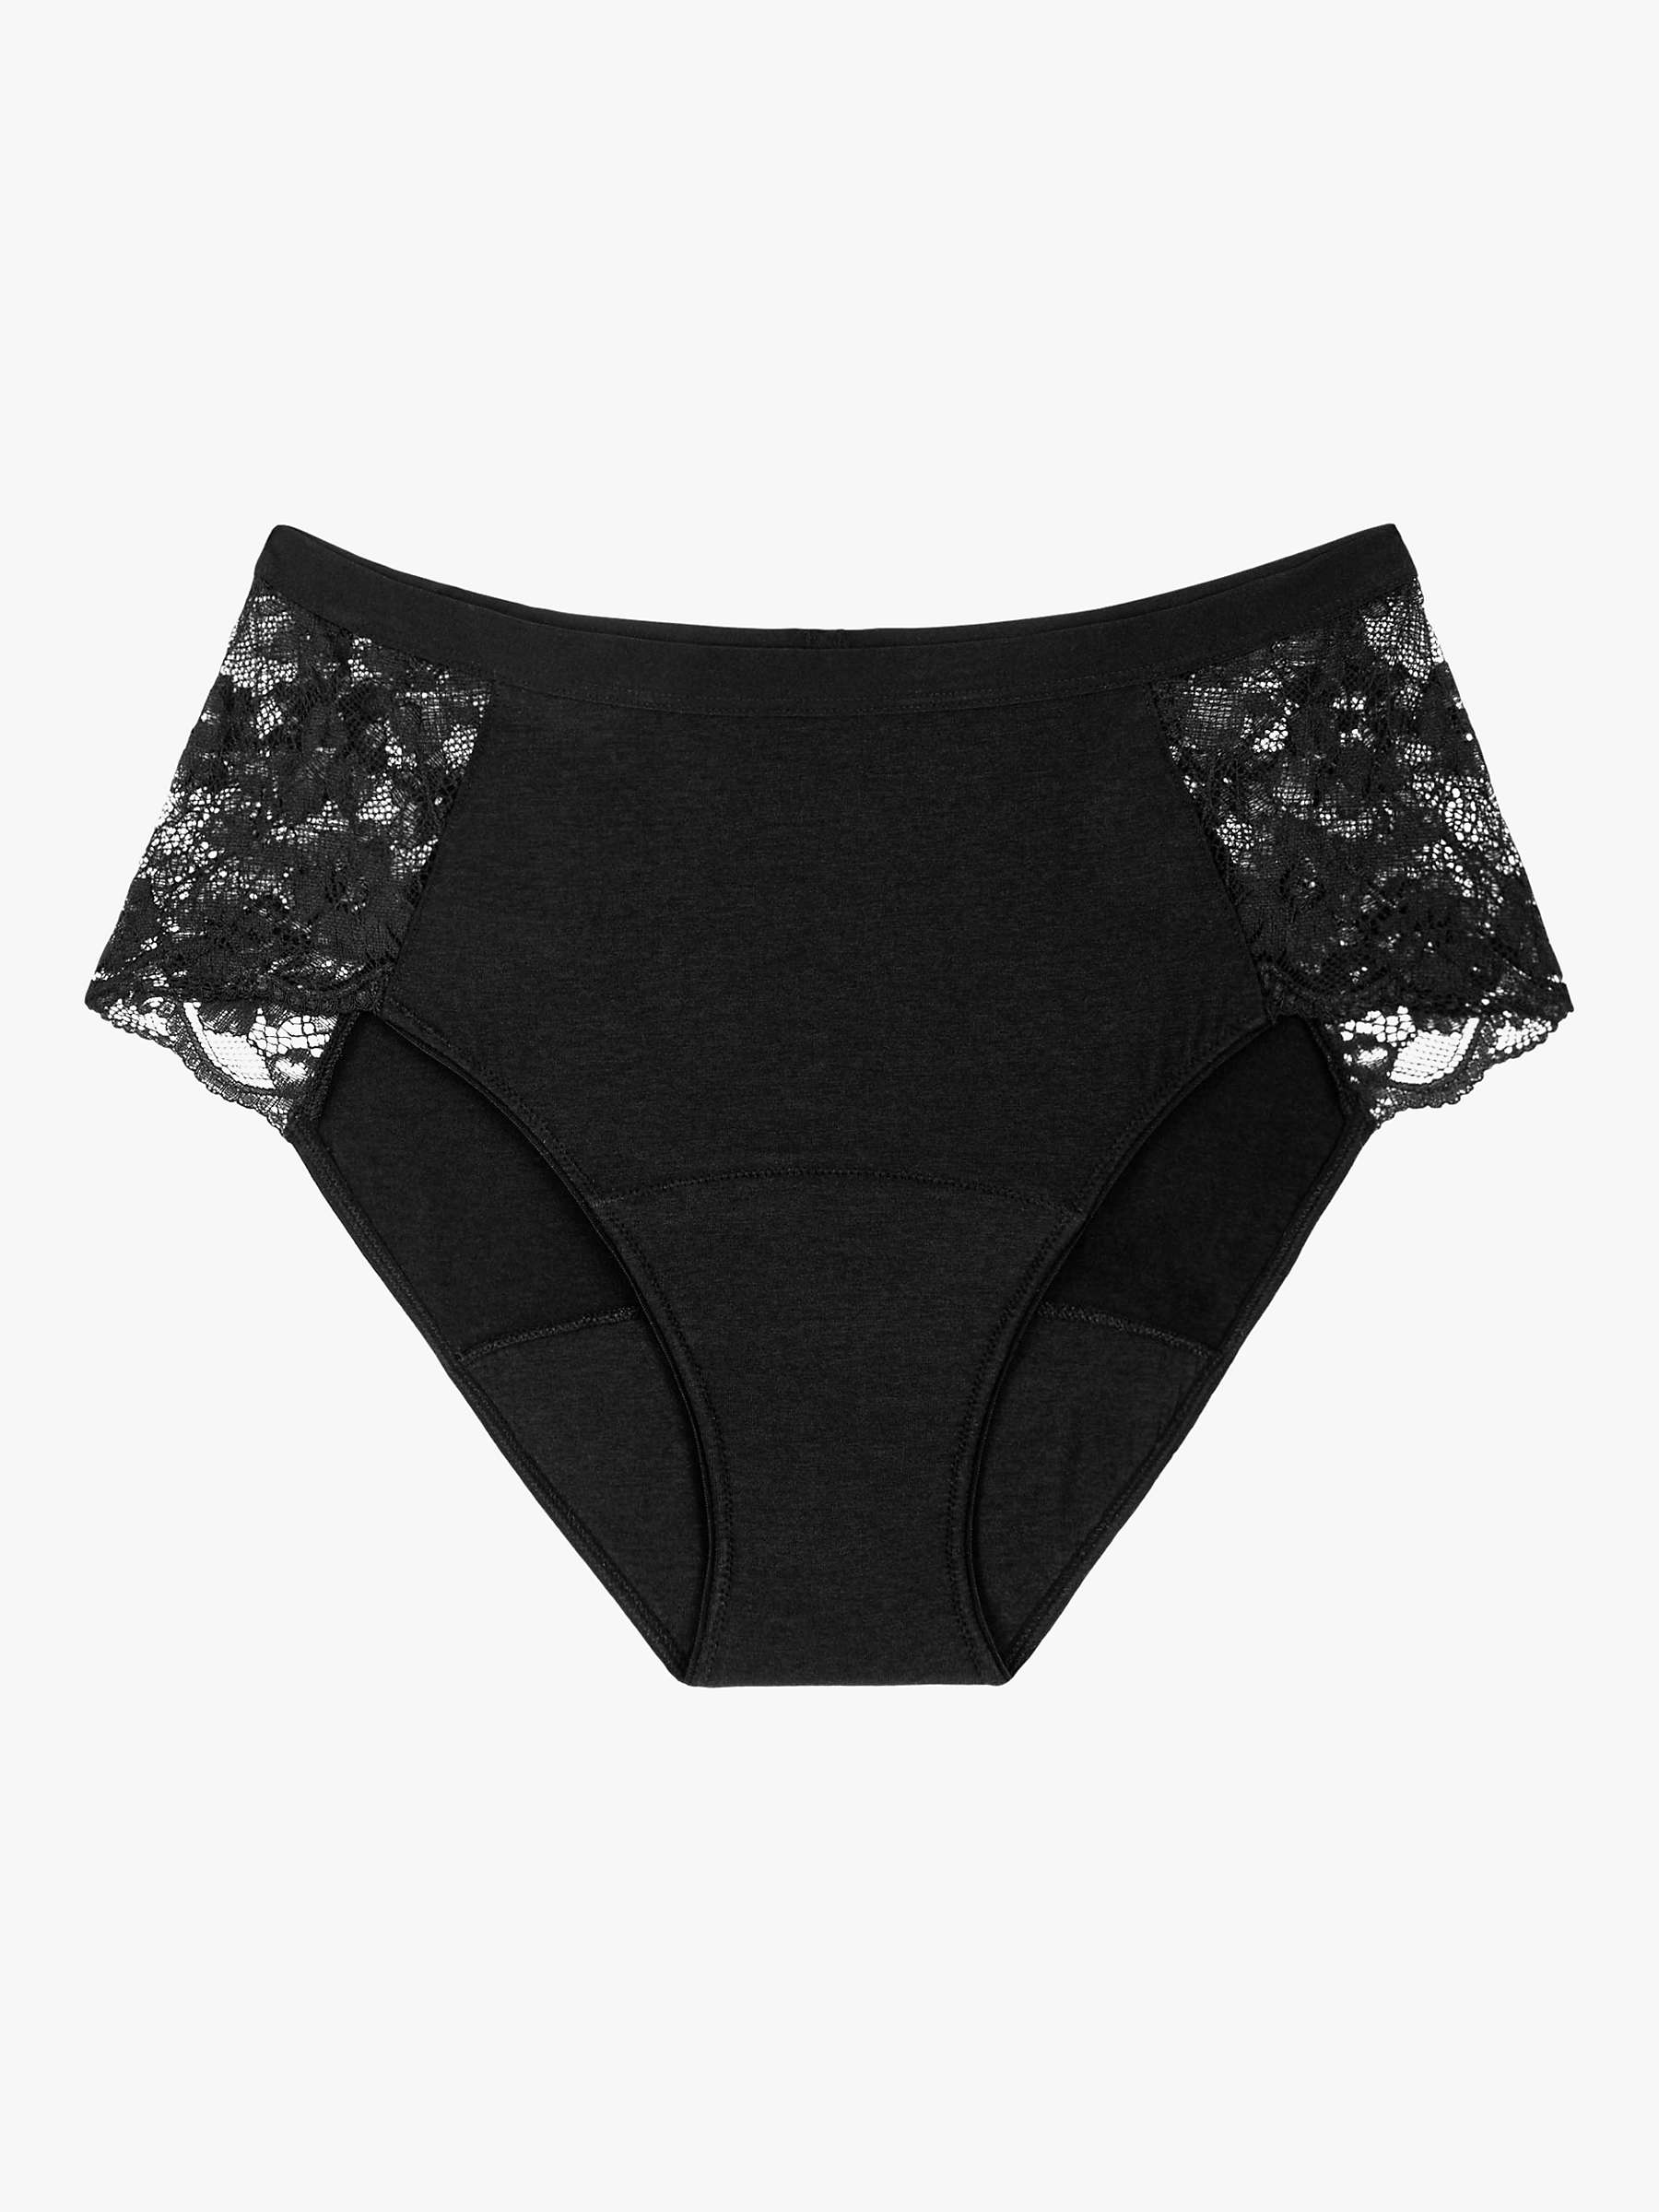 Buy Triumph Freedom Full Brief Knickers, Black Online at johnlewis.com